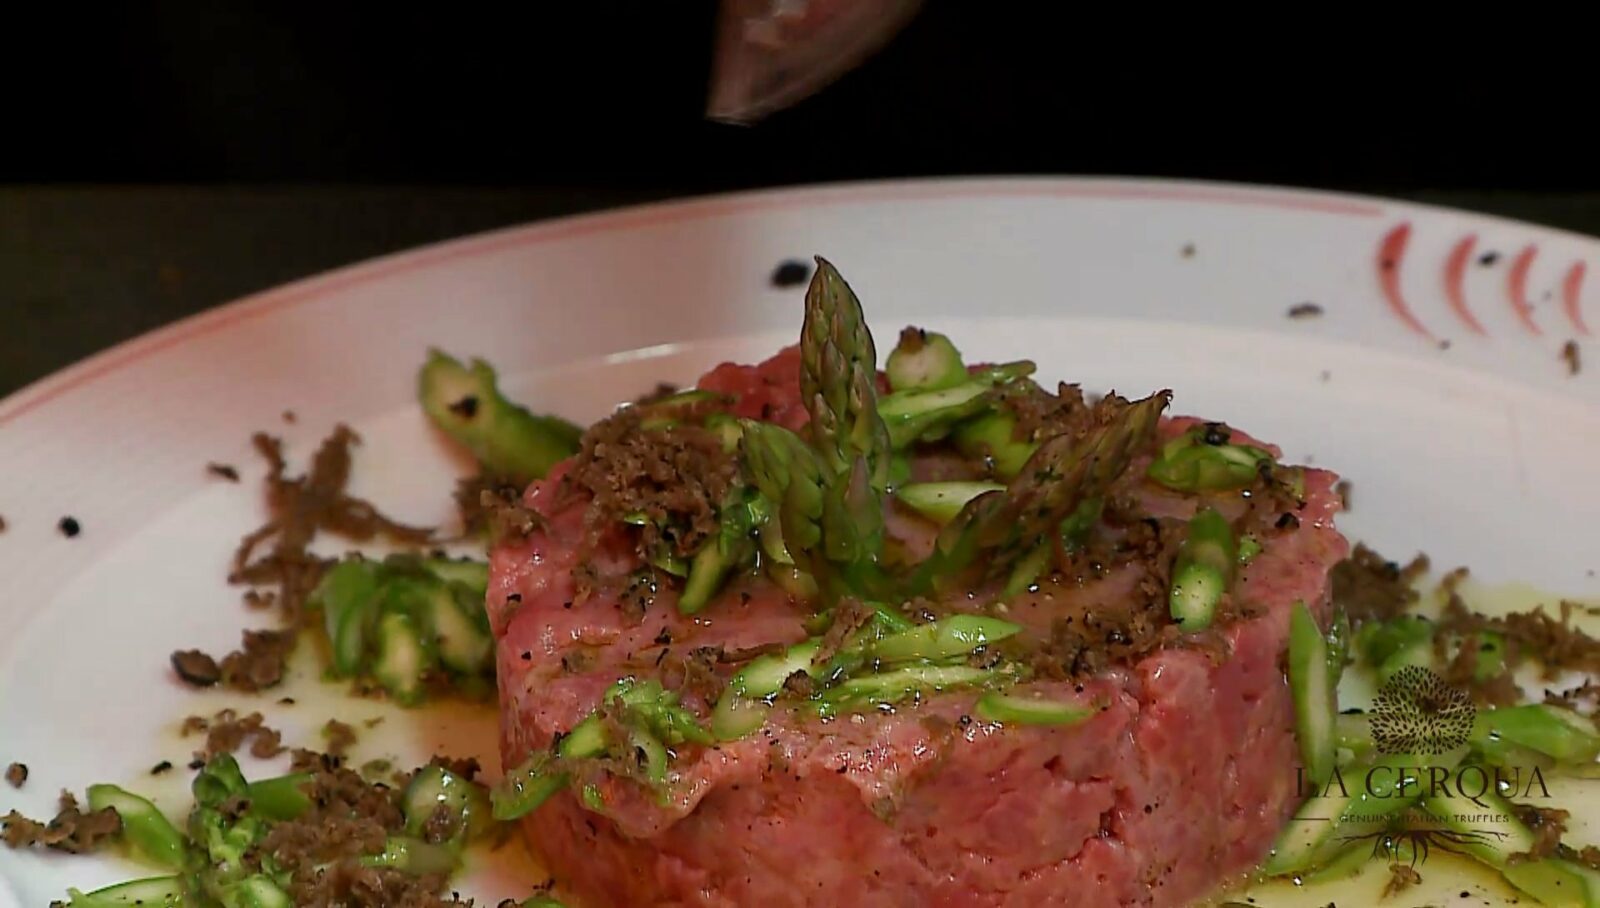 Beef Tartare with Raw Asparagus and Black Truffles